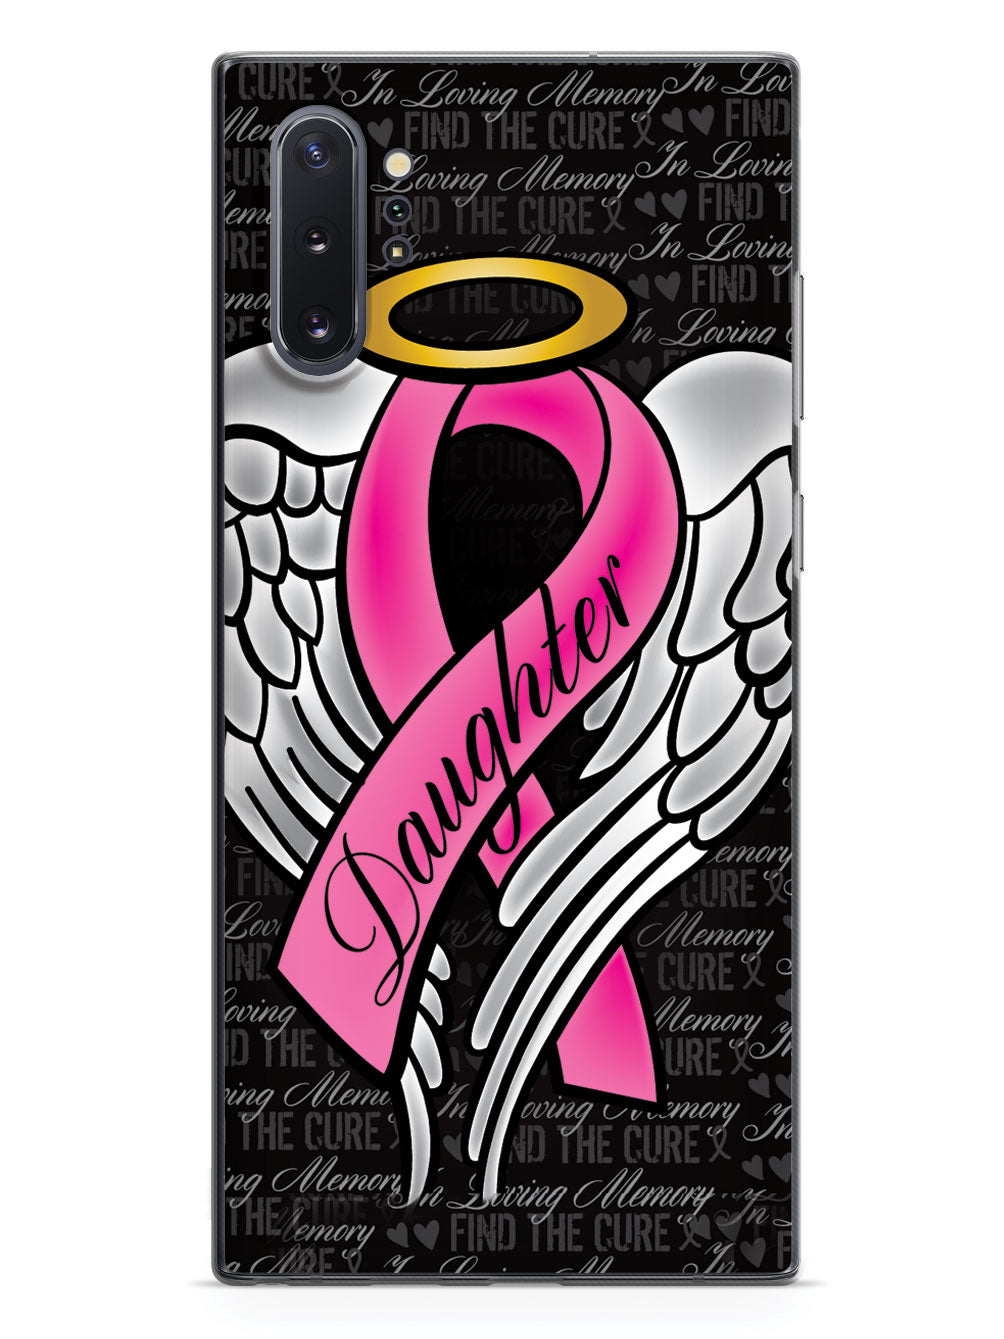 In Loving Memory of My Daughter - Pink Ribbon Case